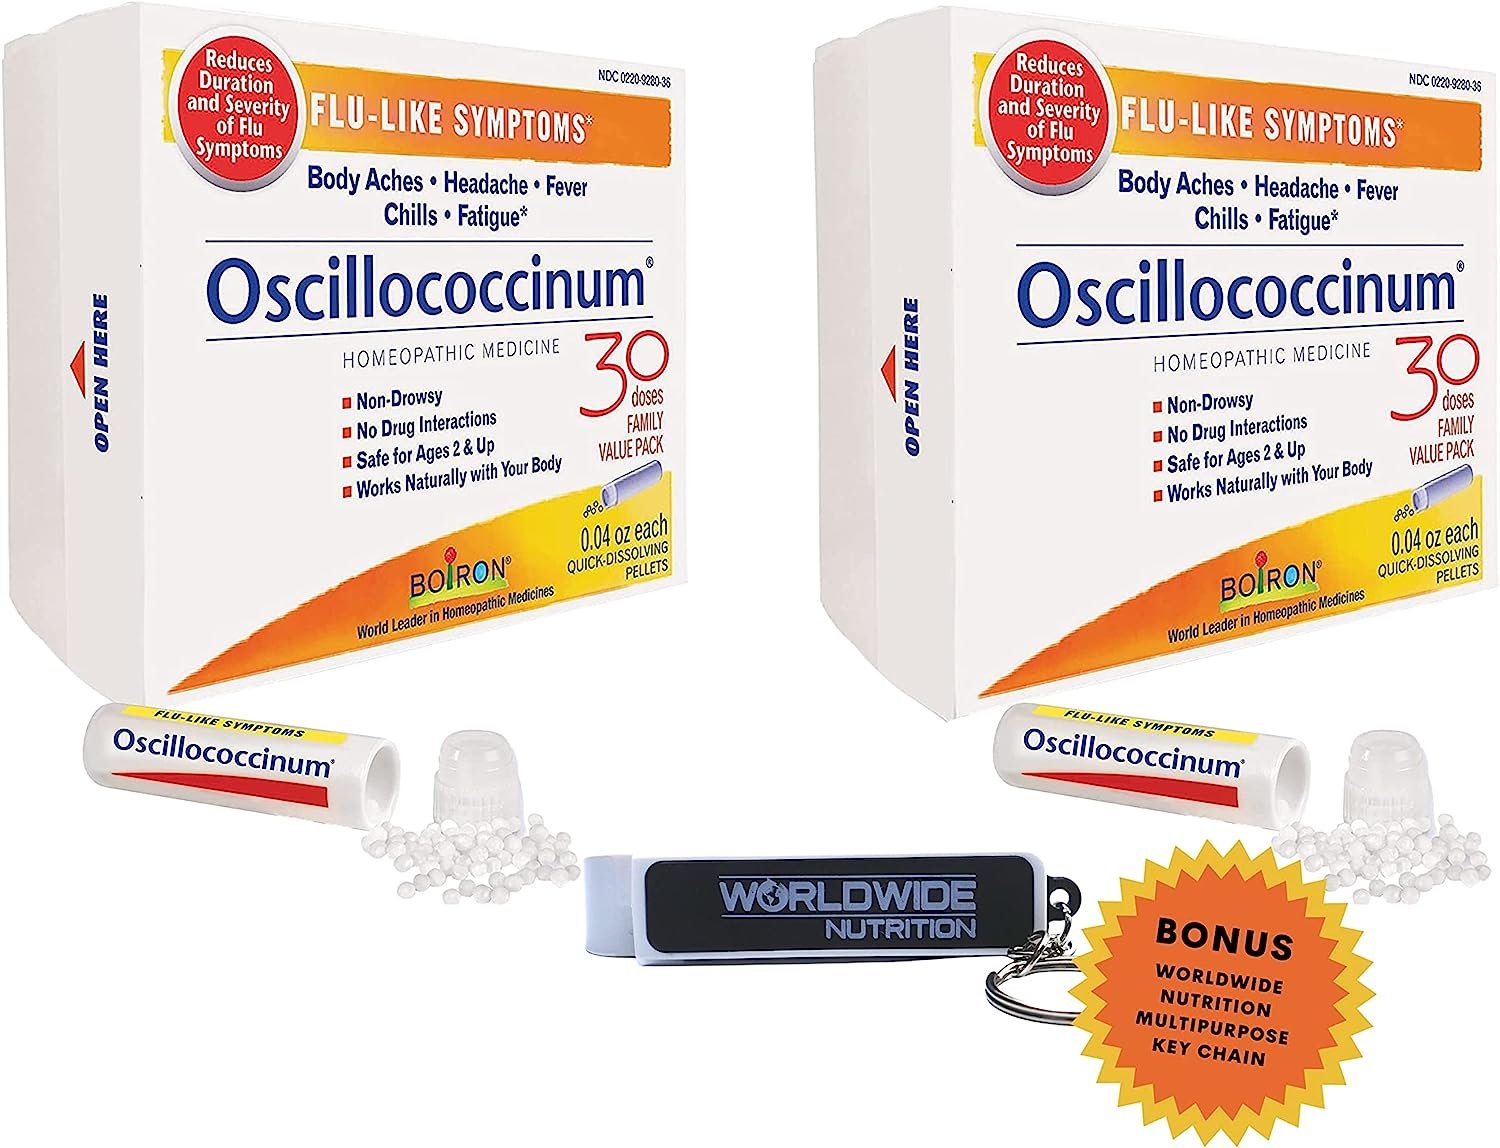 Worldwide Nutrition Boiron Oscillococcinum - Natural Flu-Like Symptom Relief for Body Aches, Headache, Fever, Chills, and Fatigue - 30 Count, Pack of 2 Quick-Dissolving Pellets with Bonus Key Chain